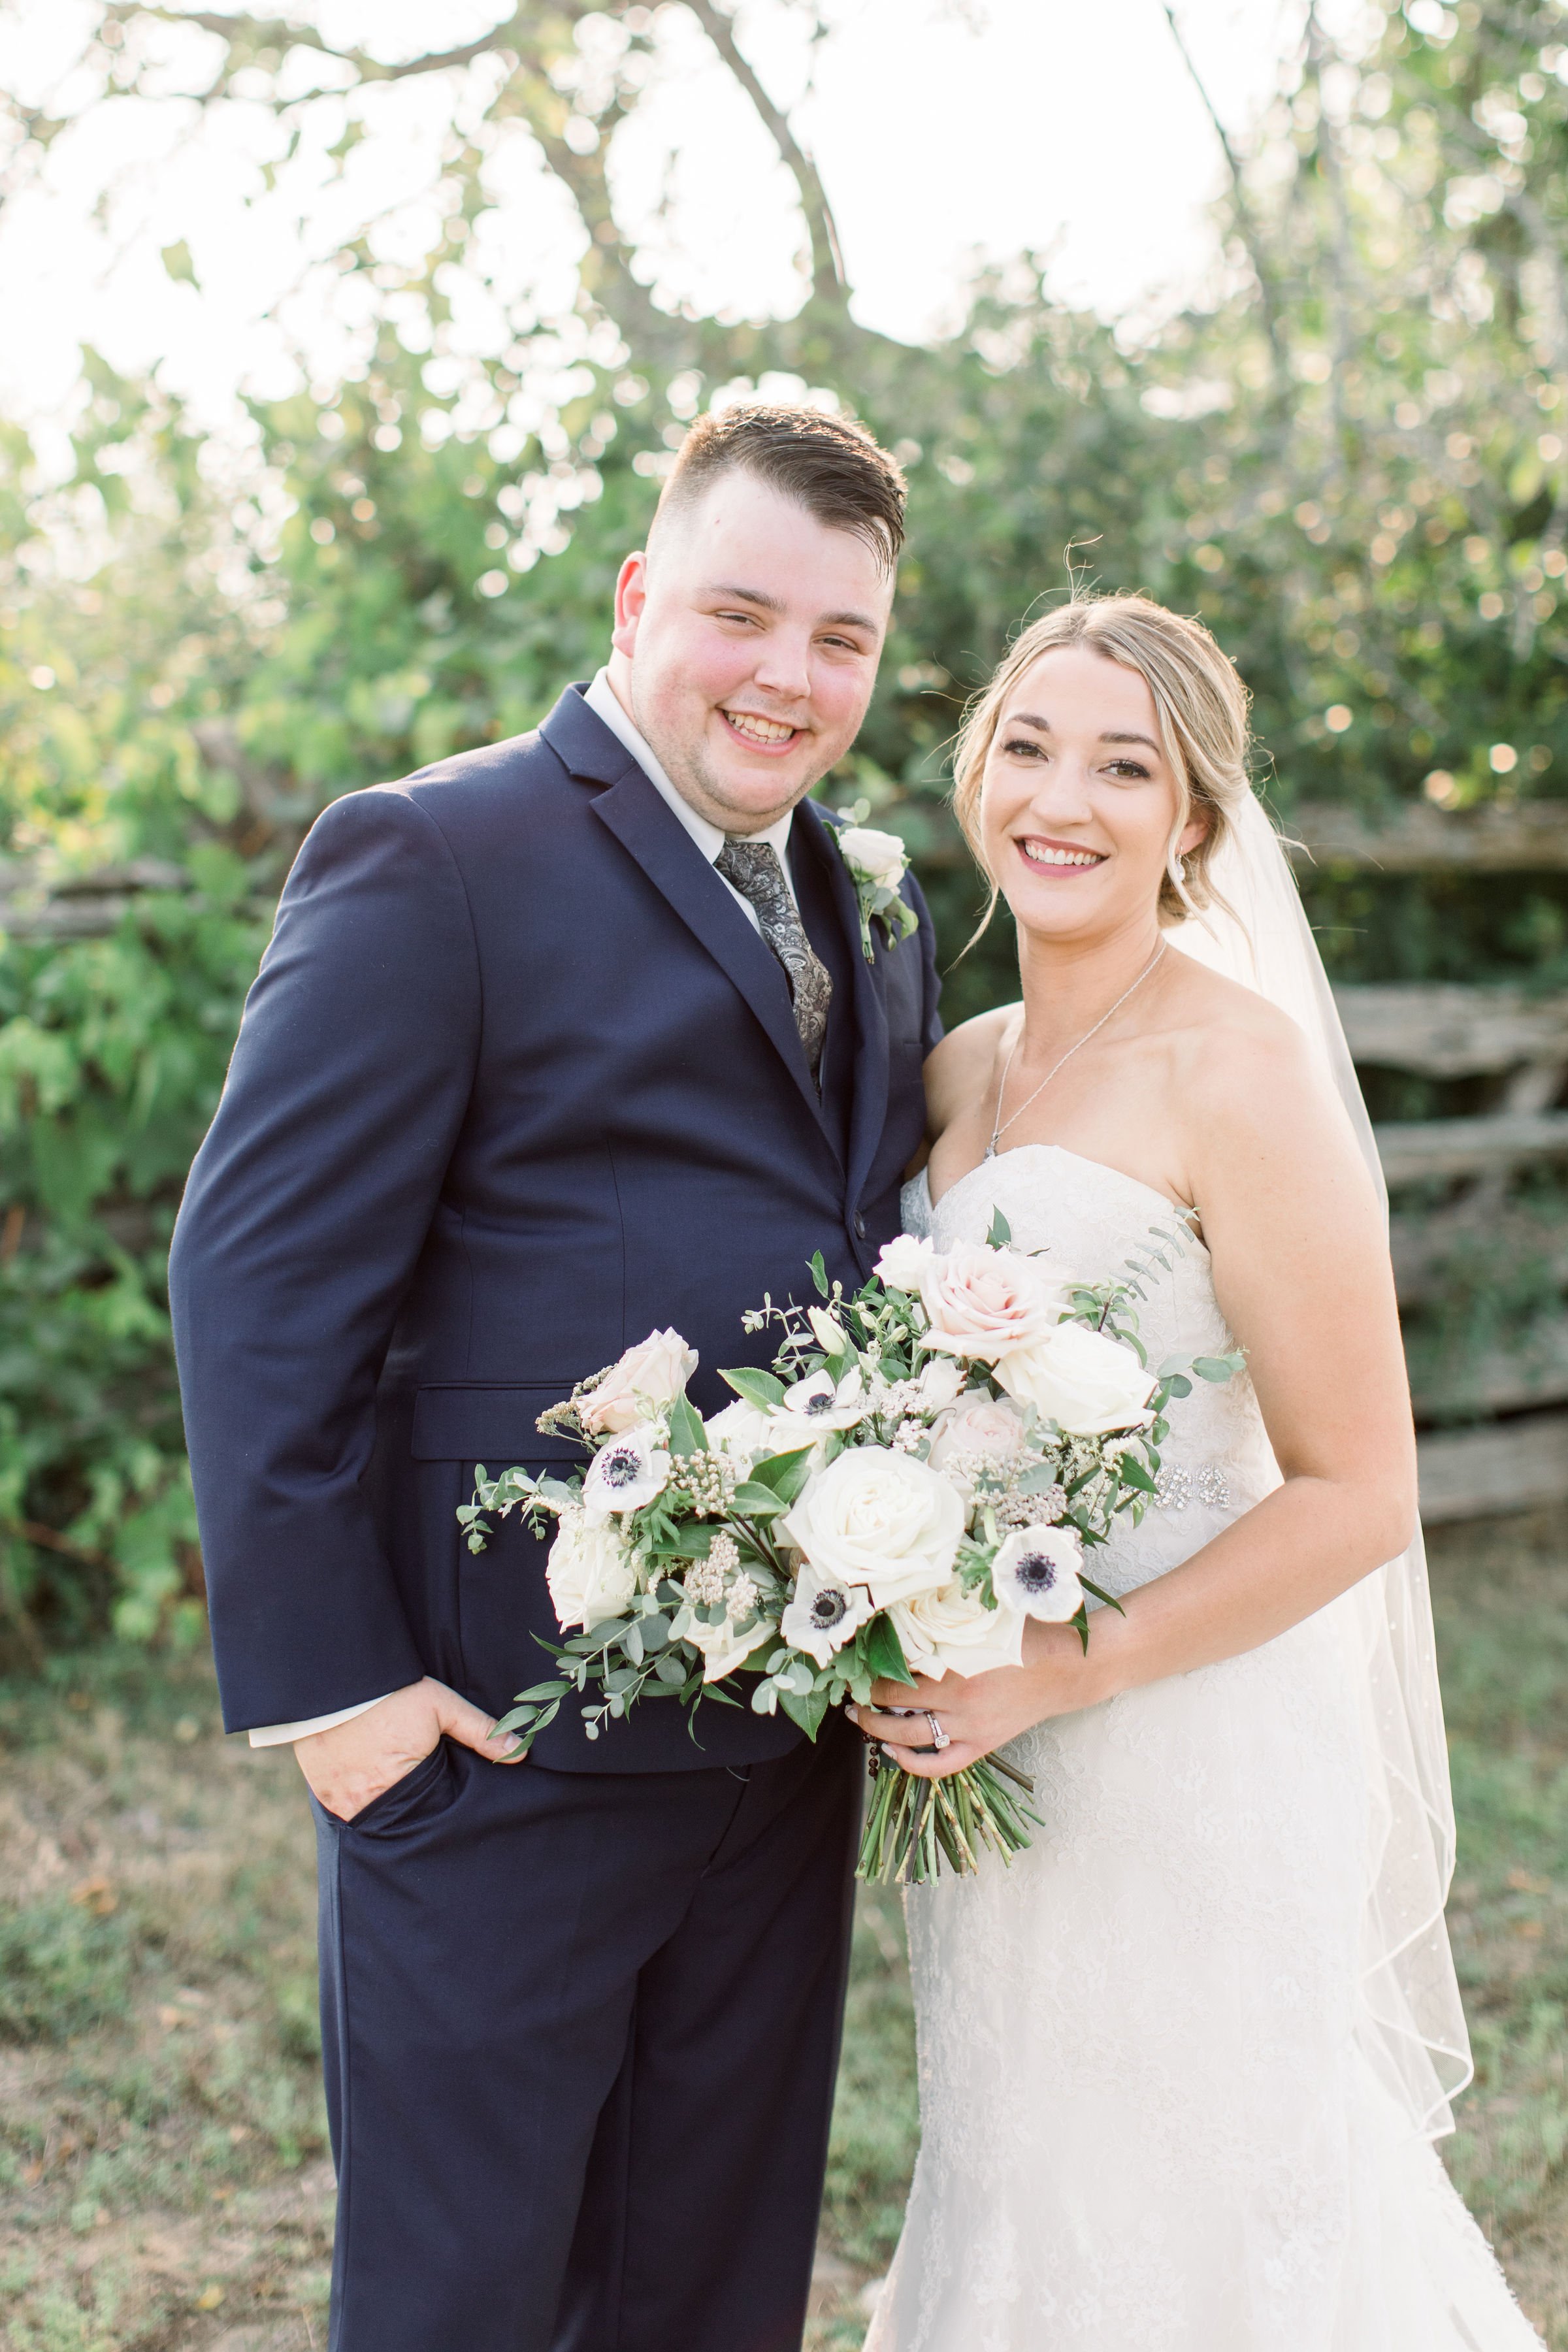  Portrait of the bride and groom on their wedding day captured by professional Chelsea Mason Photography. old time wedding locations #StonefieldEstates #Ontarioweddings #Chelseamasonphotography #Chelseamasonengagements #Ontarioweddingphotographers 